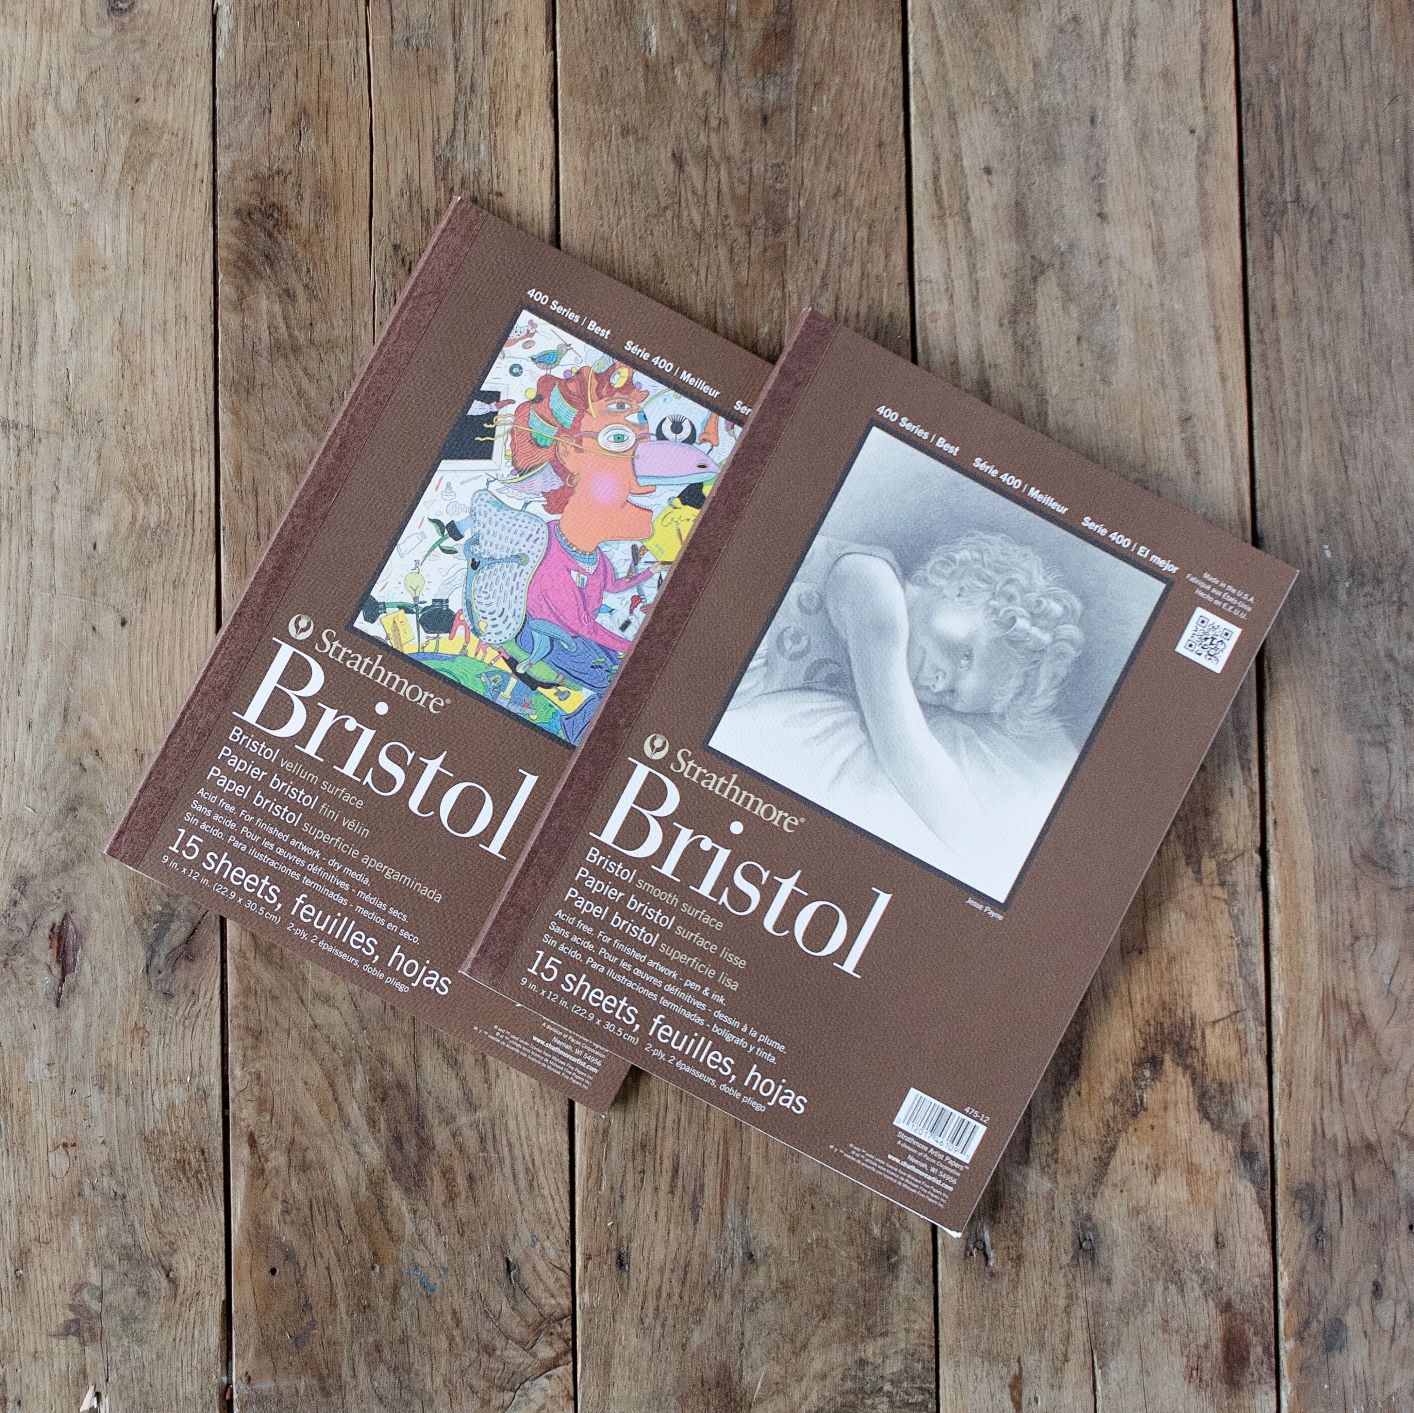 The Difference Between Bristol Smooth & Vellum Strathmore Paper 